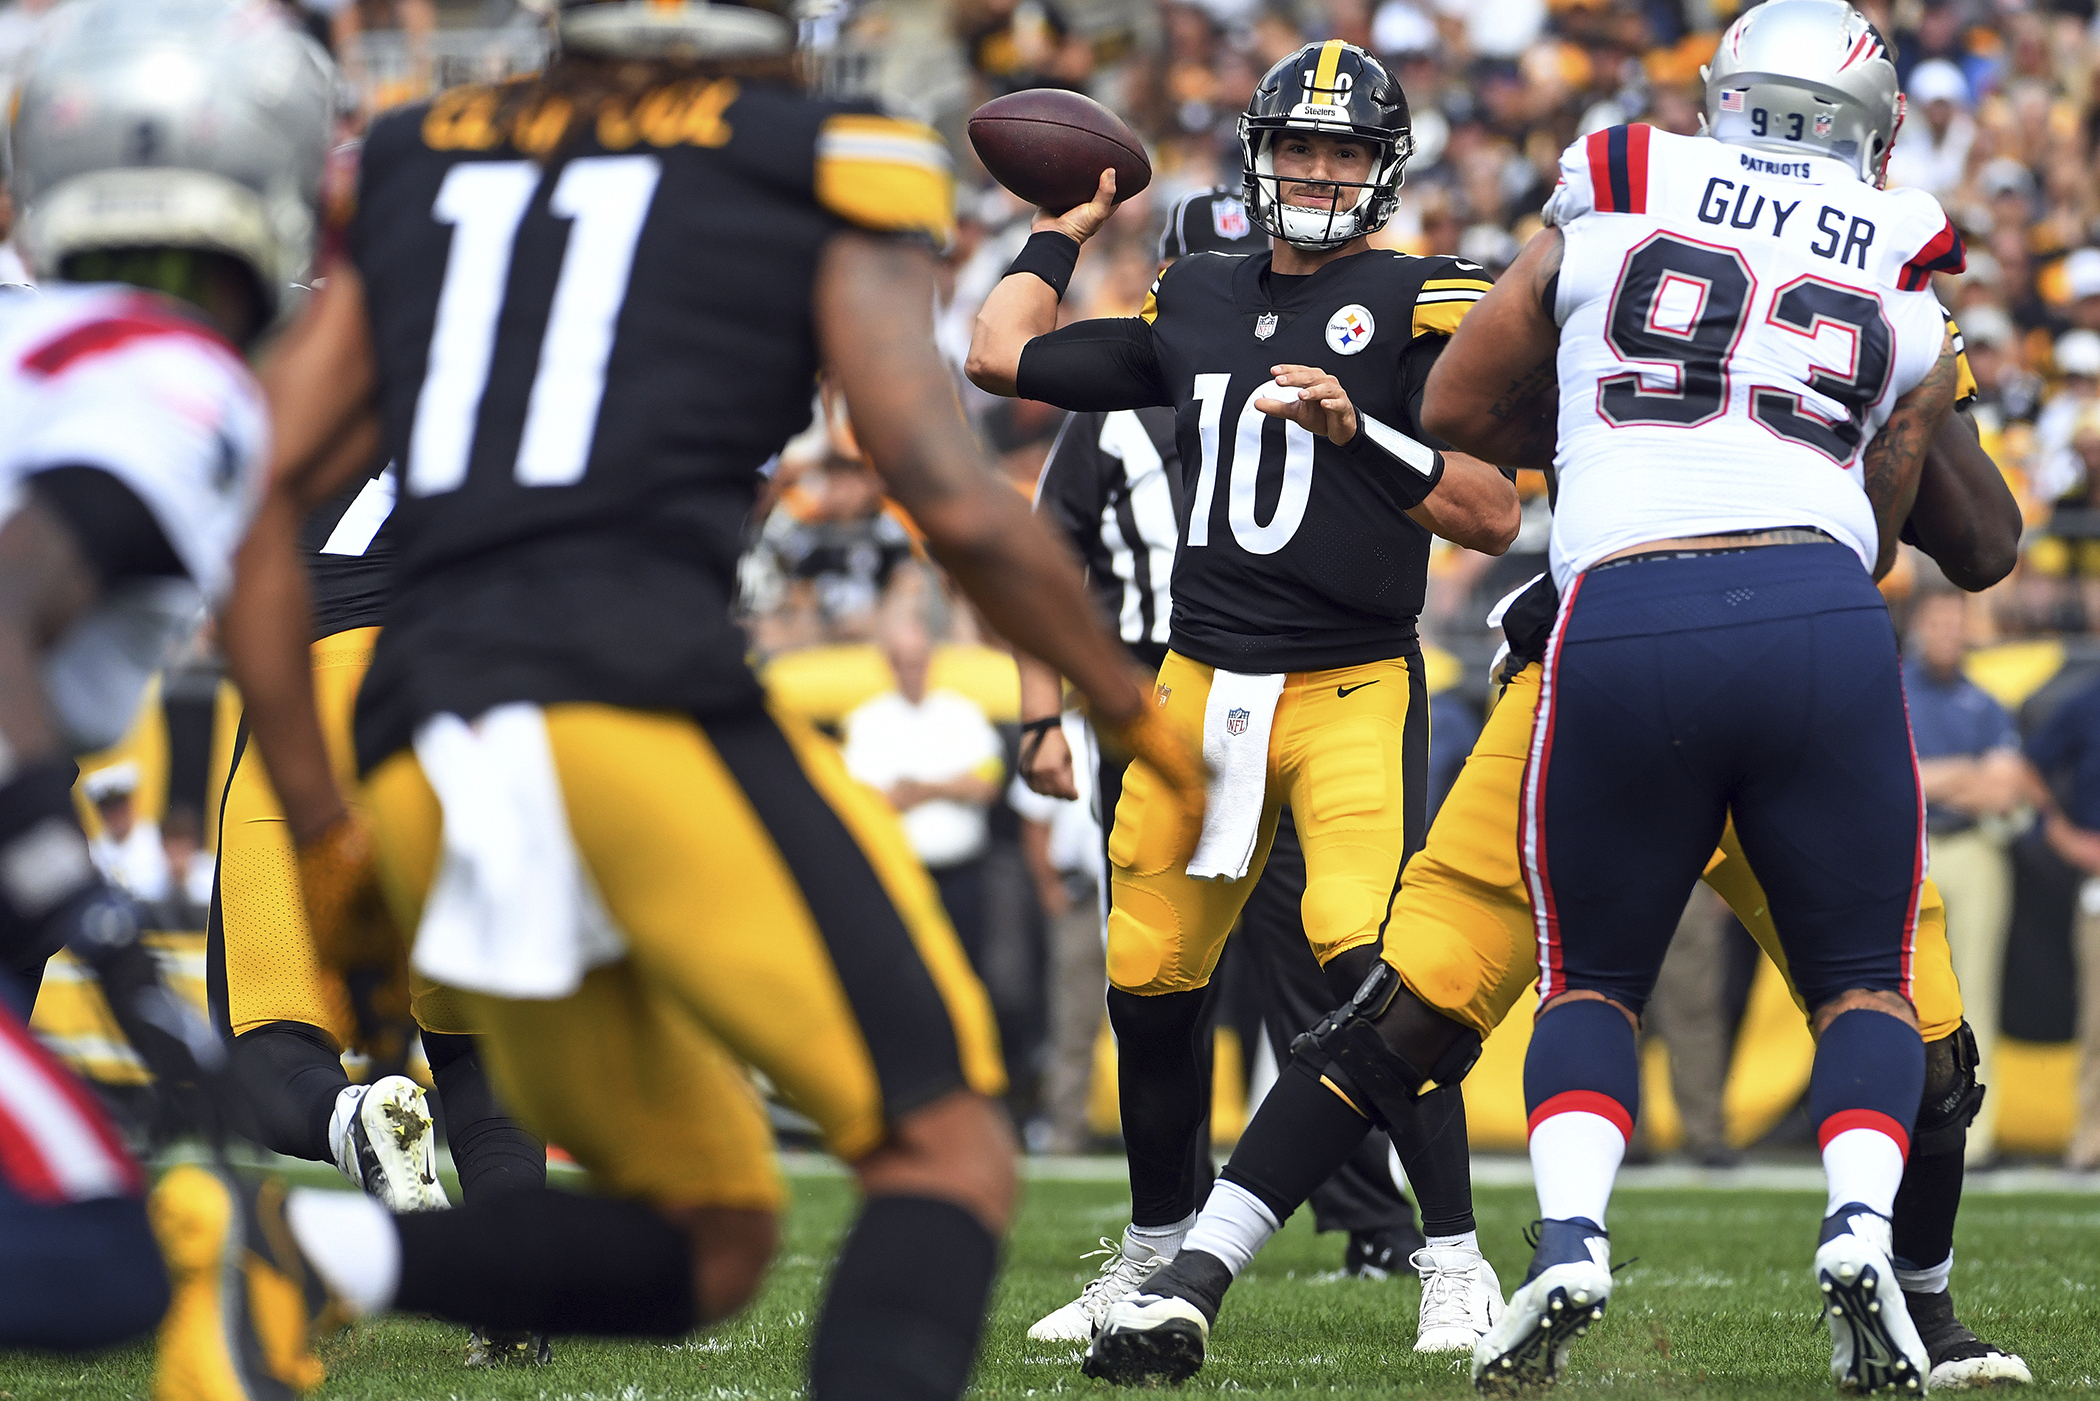 Deep trouble? Steelers look to revive sluggish pass game